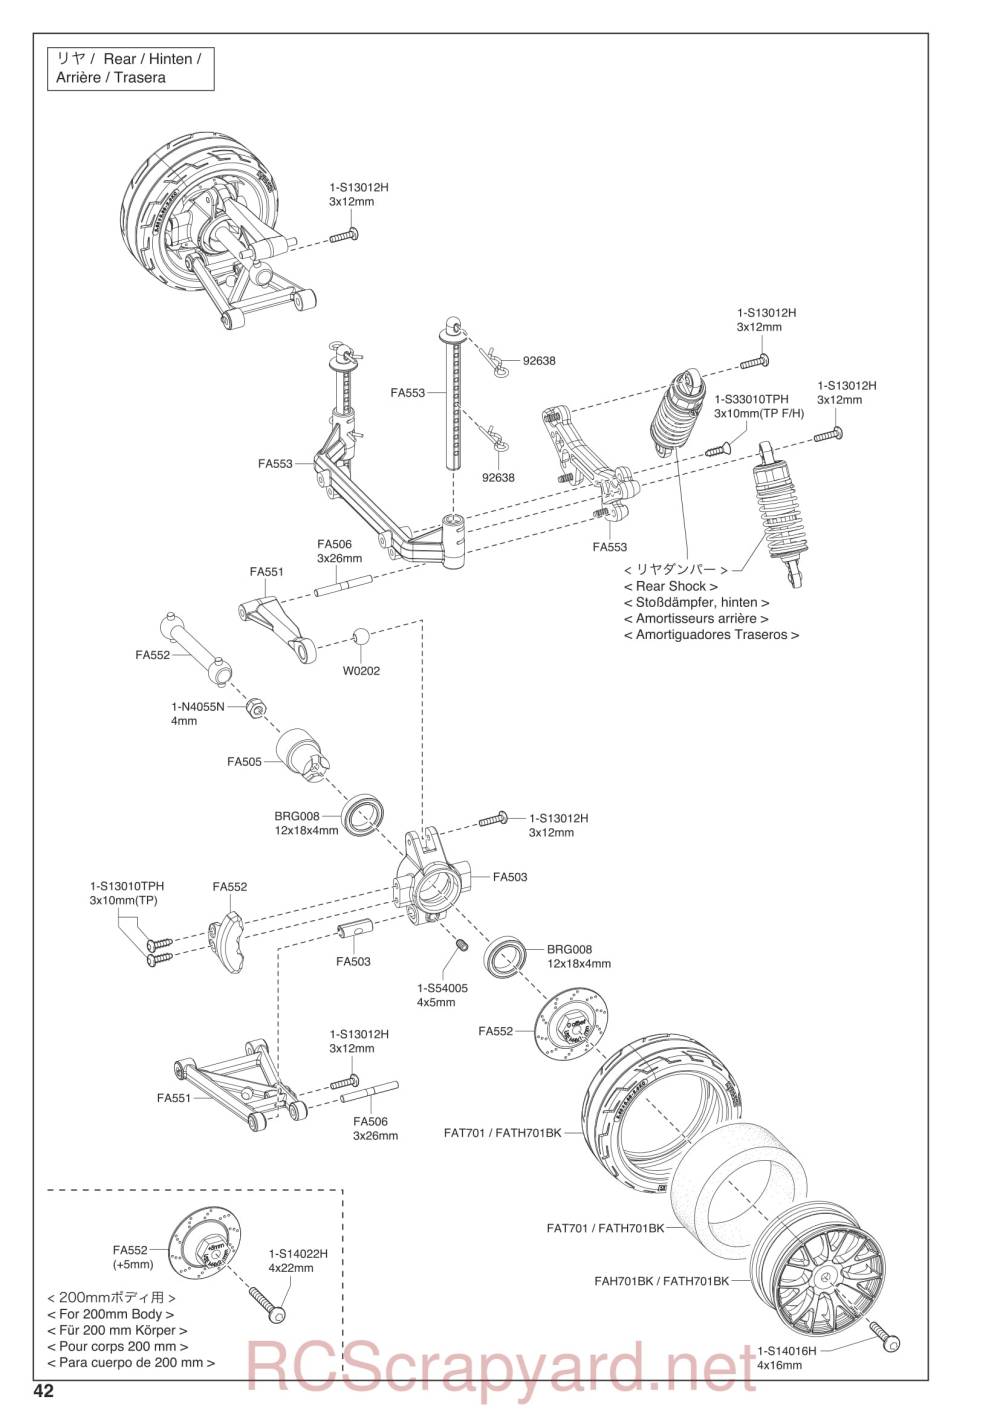 Kyosho EP Fazer Mk2 - Exploded View - Page 5